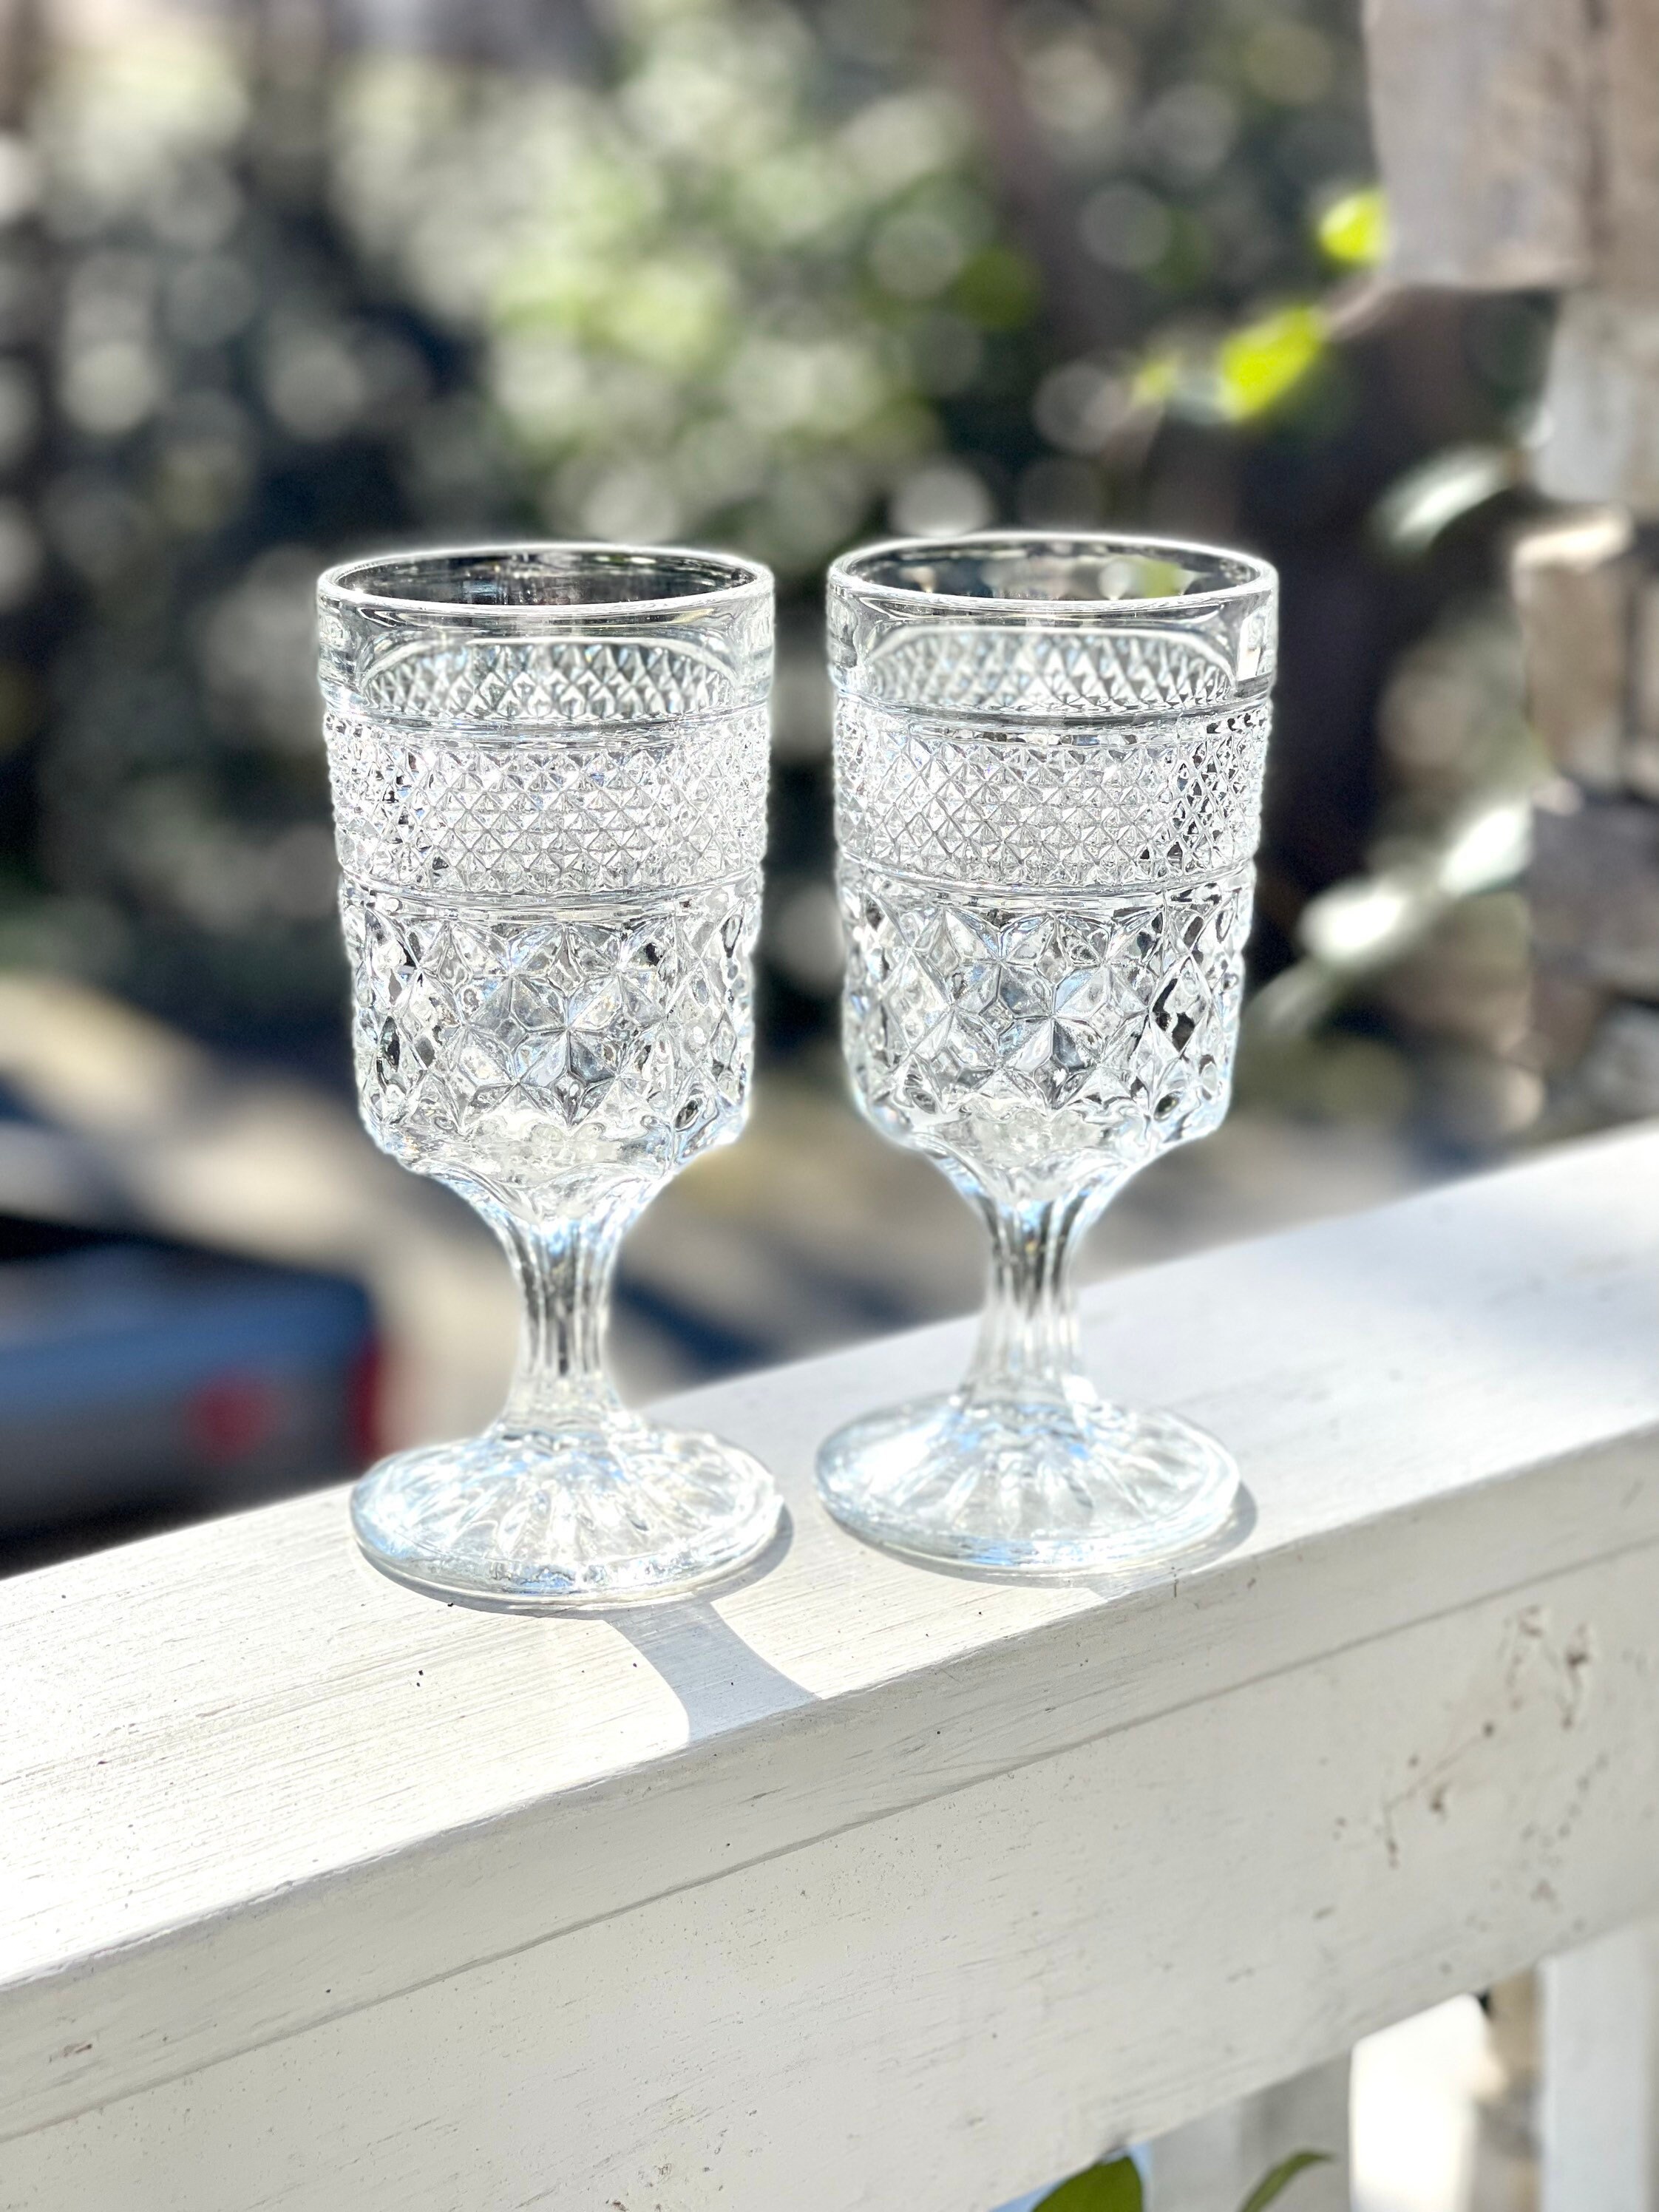 Vintage Smithereens Custom Hand-Painted Water Goblets / Iced Tea